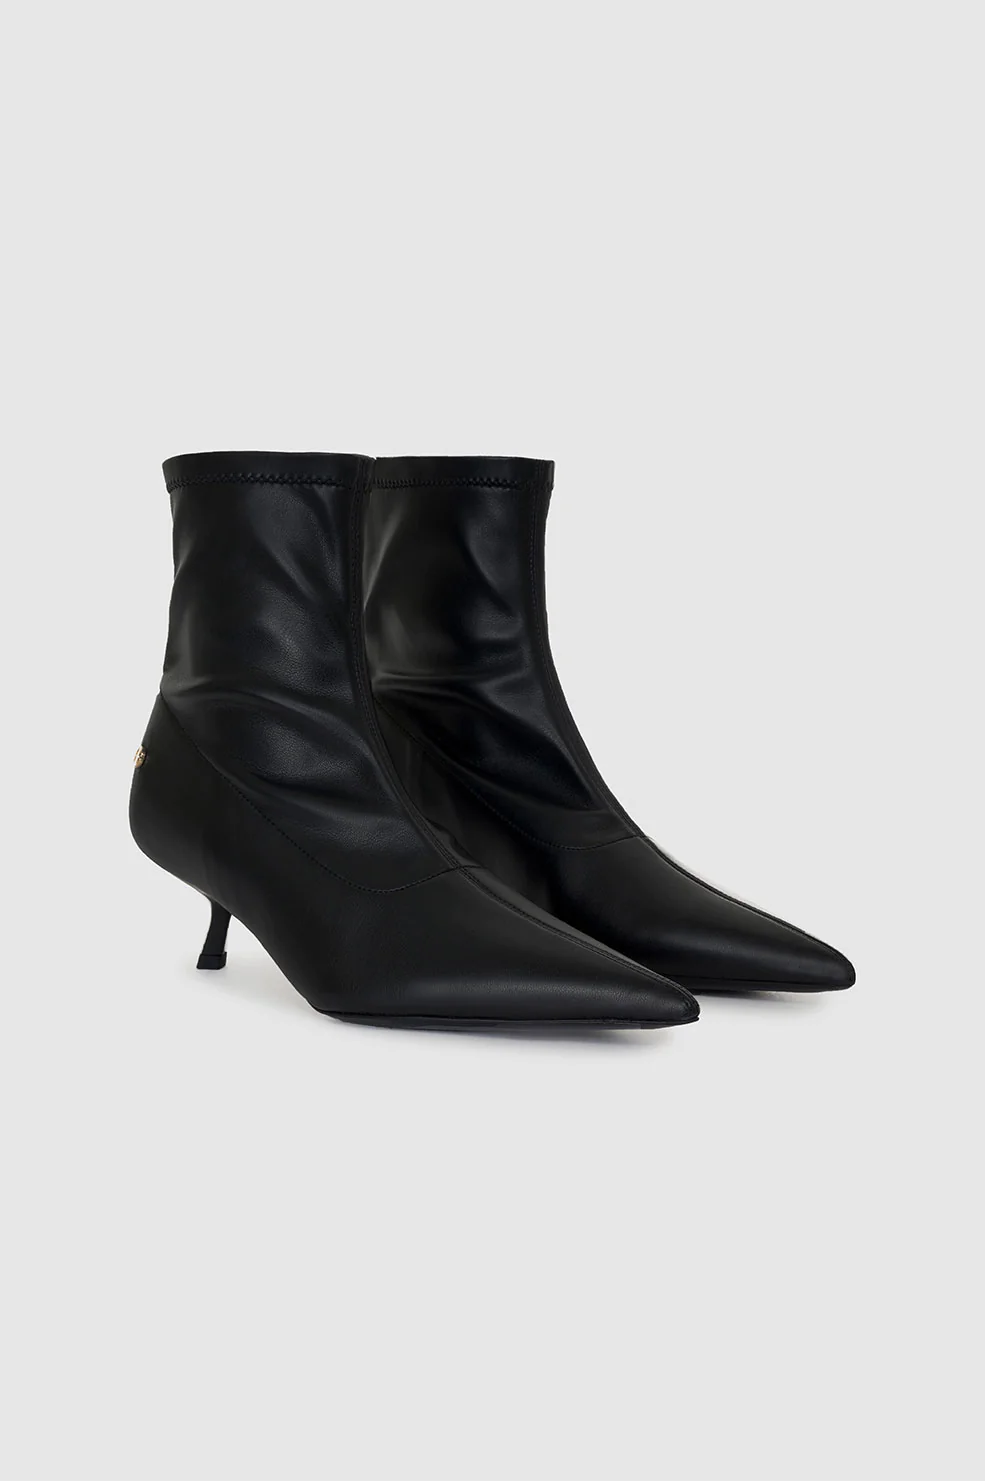 ANINE BING Hilda Boots in Black available at TNT The New Trend Australia.